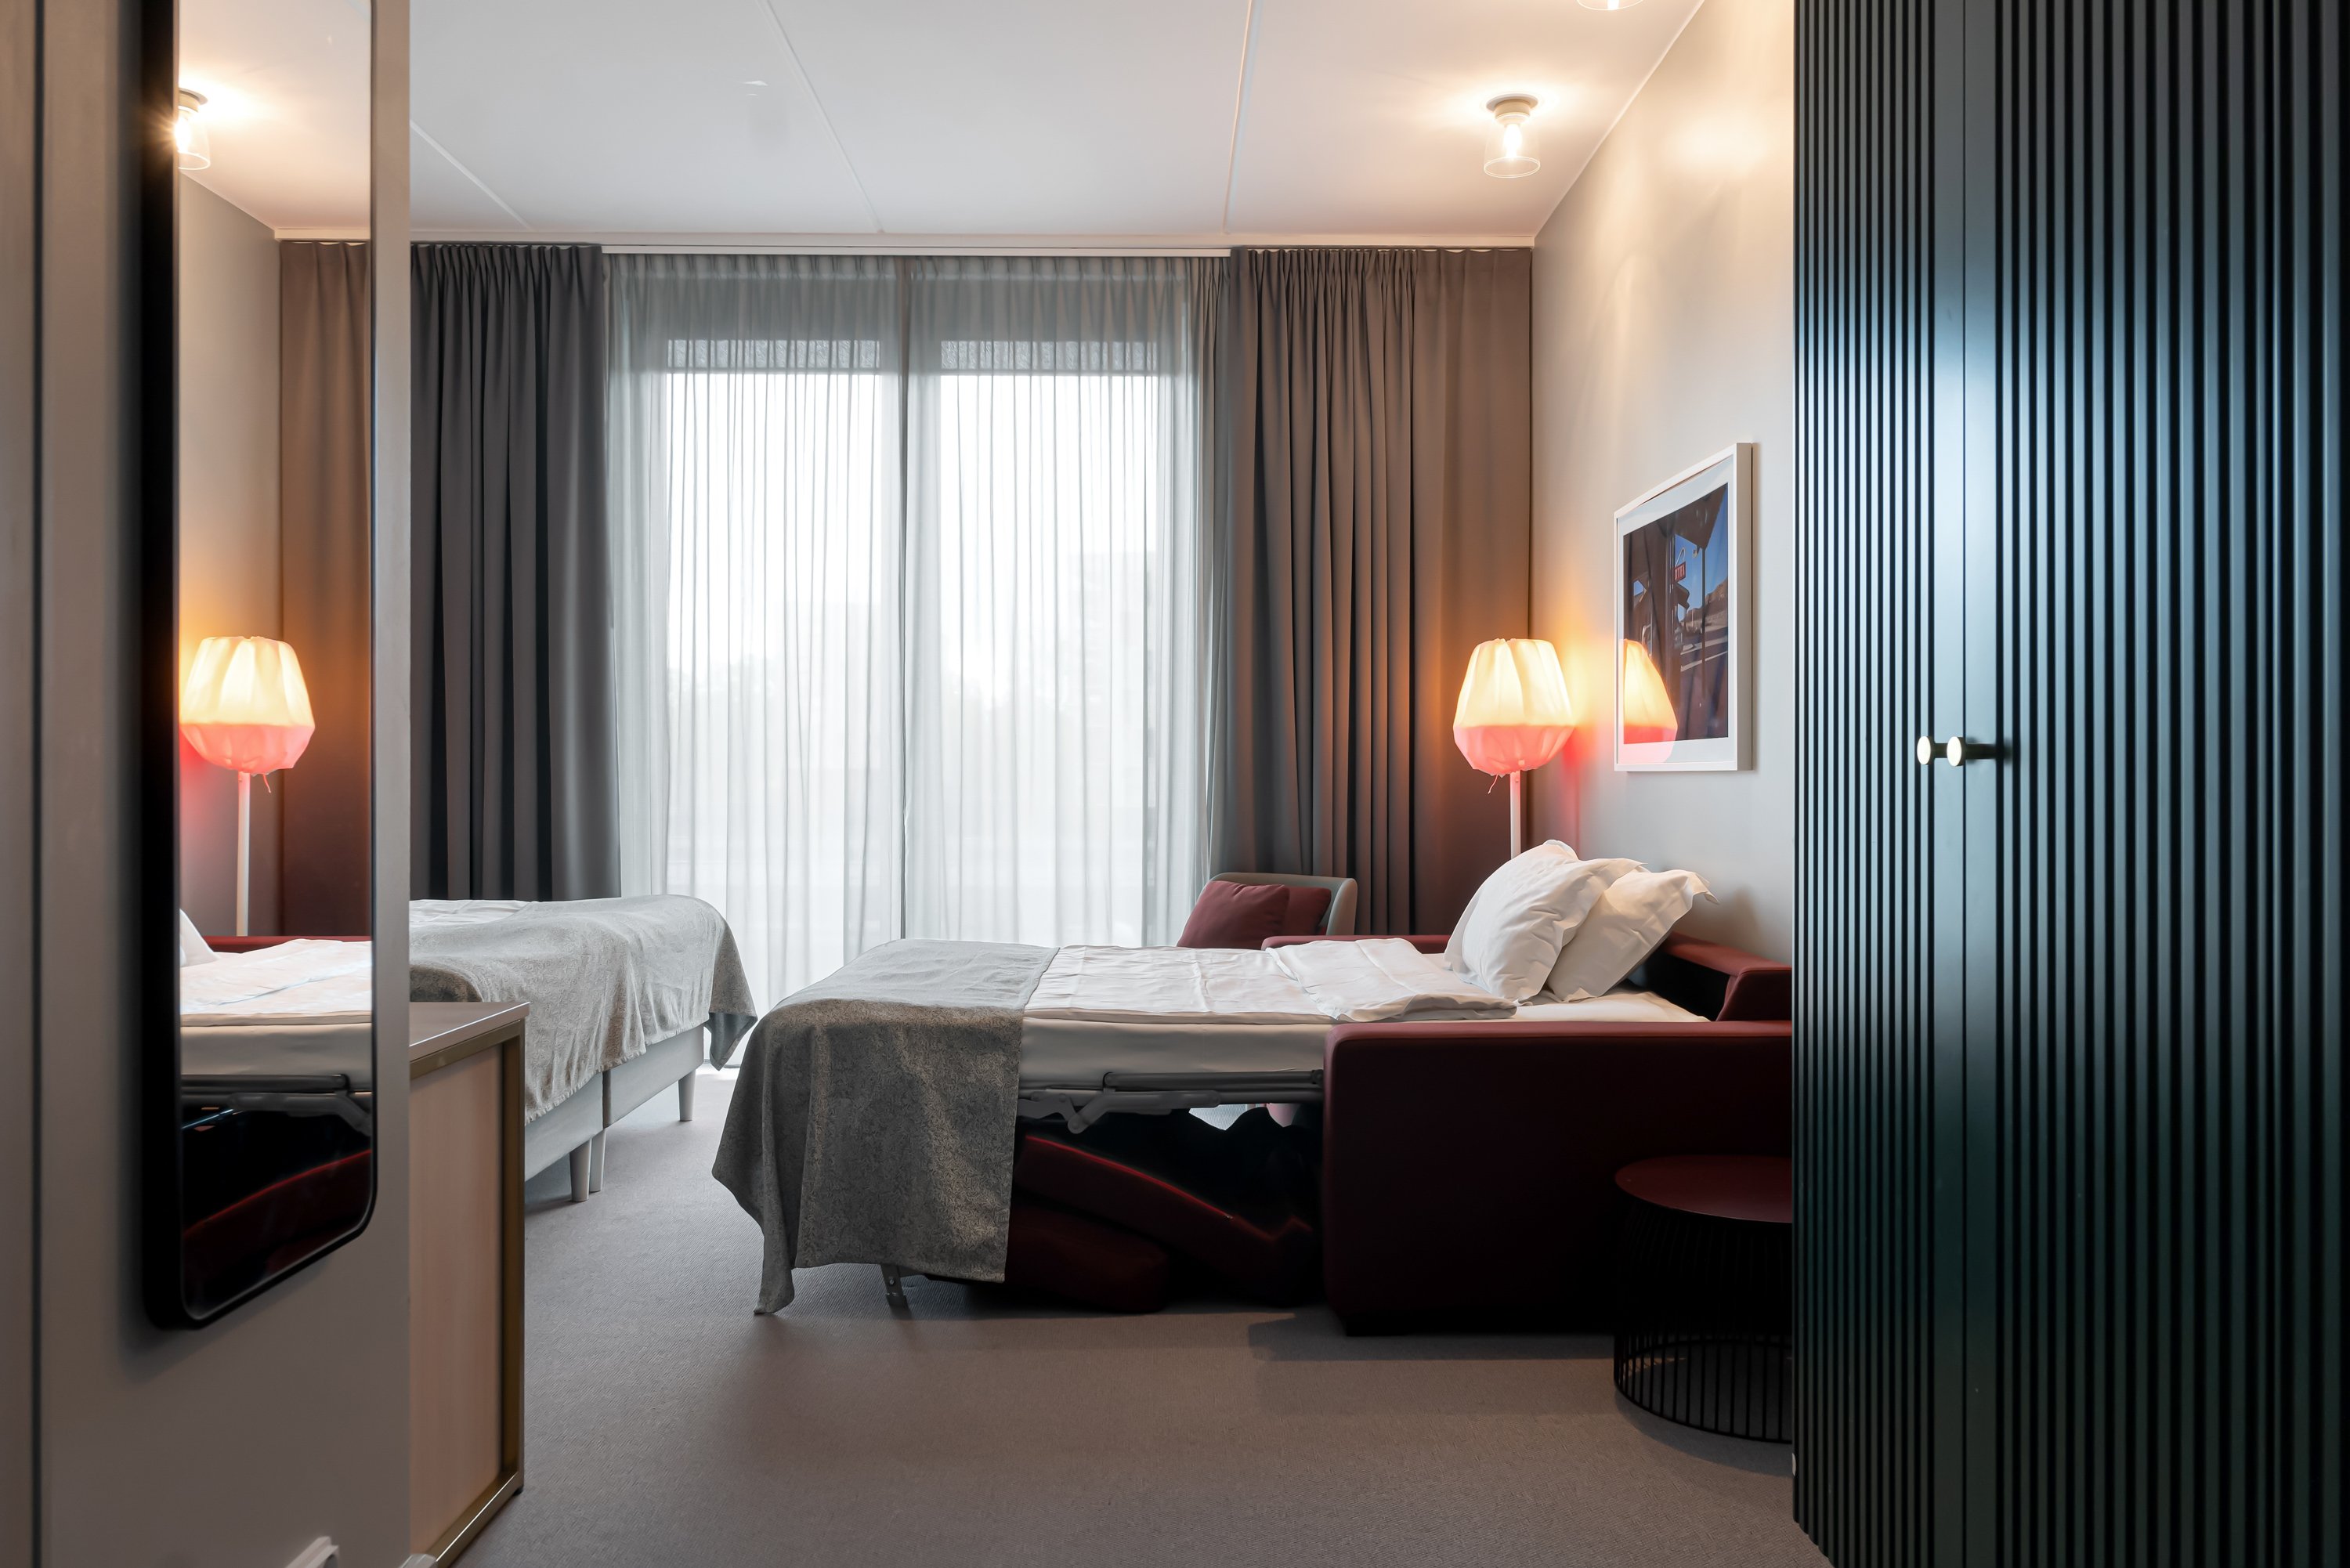 Bright hotel room with wardrobe, sofa bed and large window